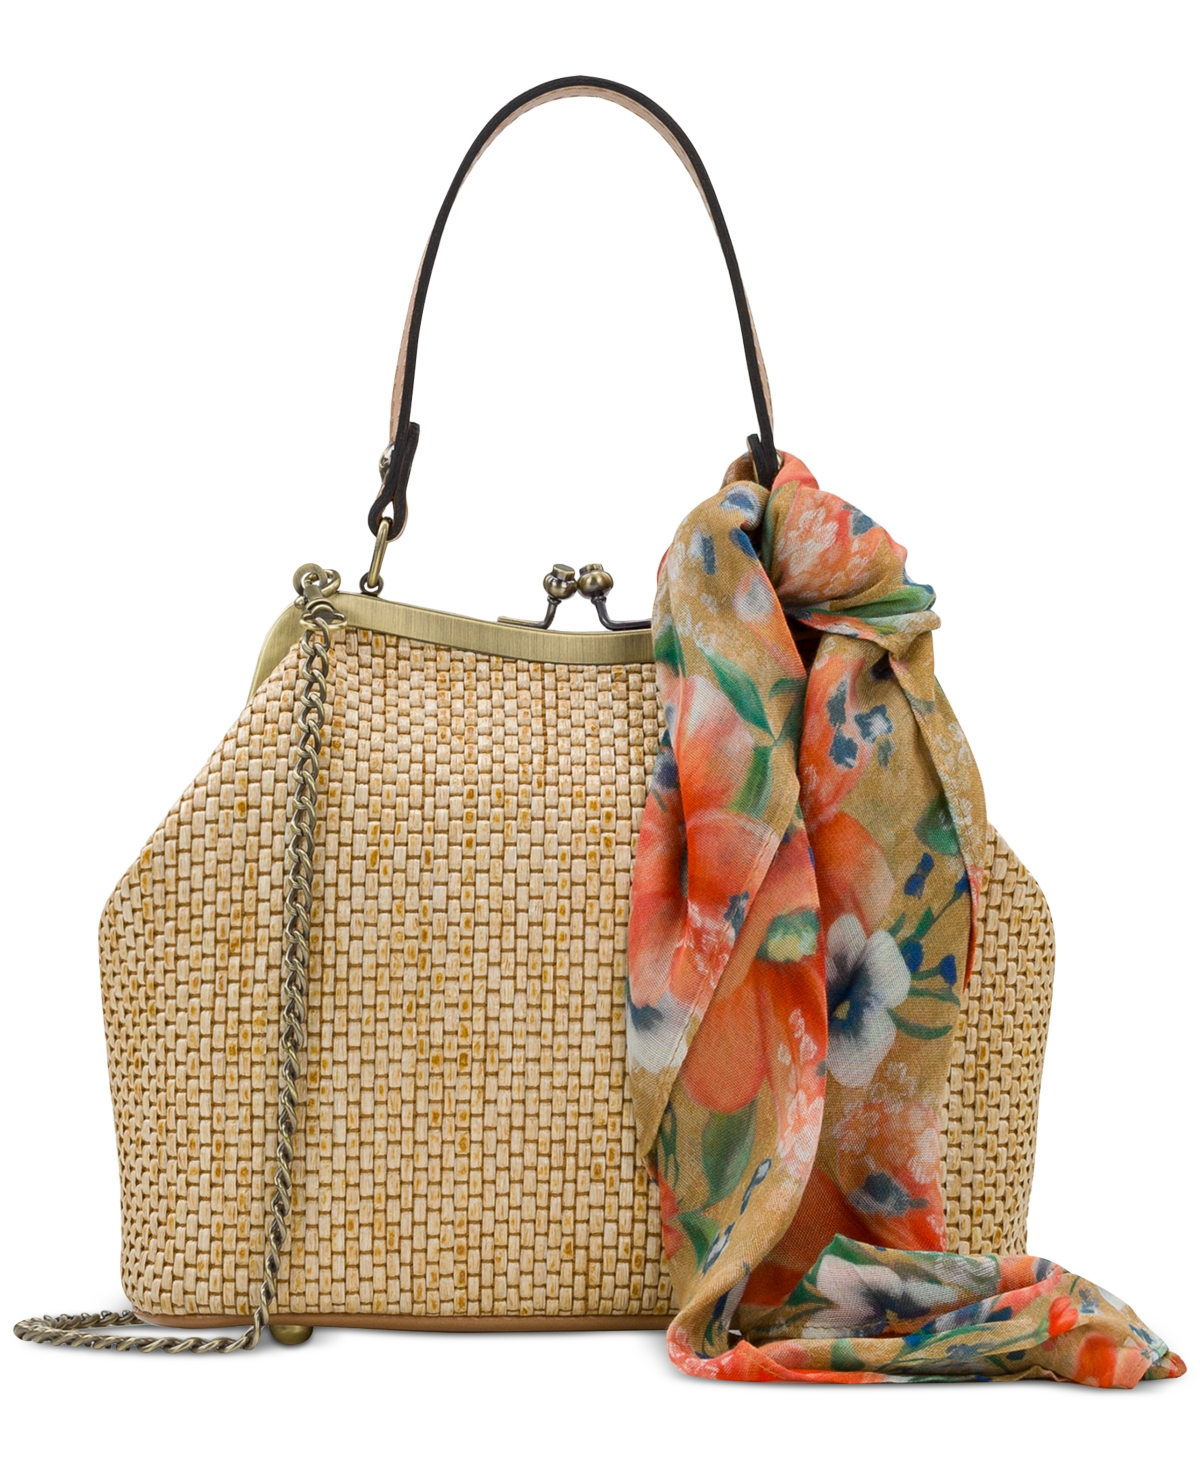 Patricia Nash Laureana Small Frame Bag With Apricot Blossoms Scarf In Multi